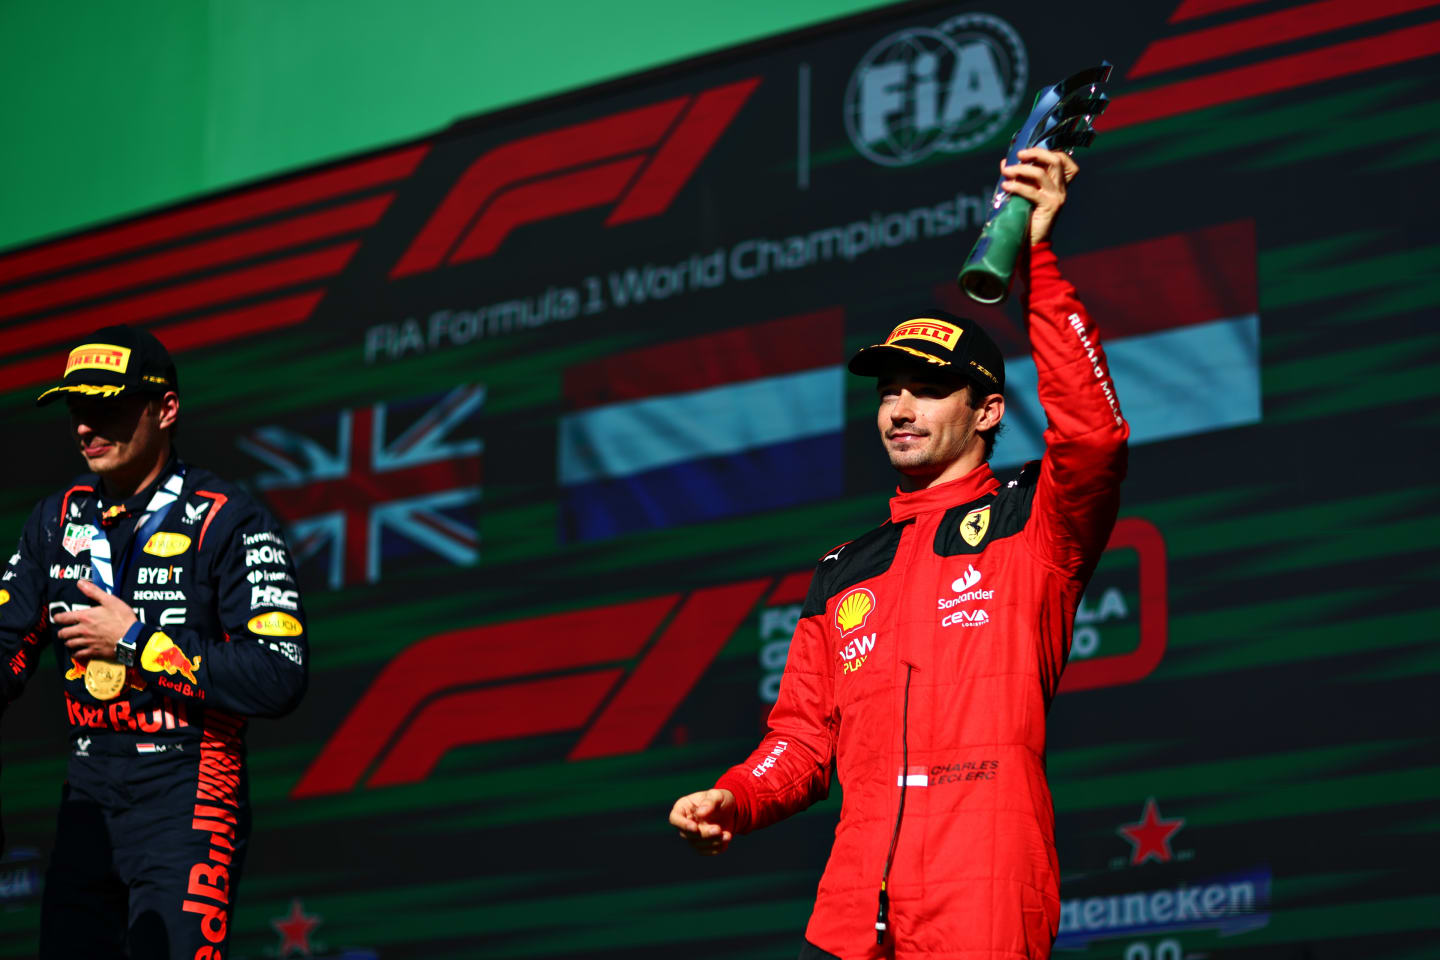 MEXICO CITY, MEXICO - OCTOBER 29: Third placed Charles Leclerc of Monaco and Ferrari celebrates on the podium after the F1 Grand Prix of Mexico at Autodromo Hermanos Rodriguez on October 29, 2023 in Mexico City, Mexico. (Photo by Dan Istitene - Formula 1/Formula 1 via Getty Images)